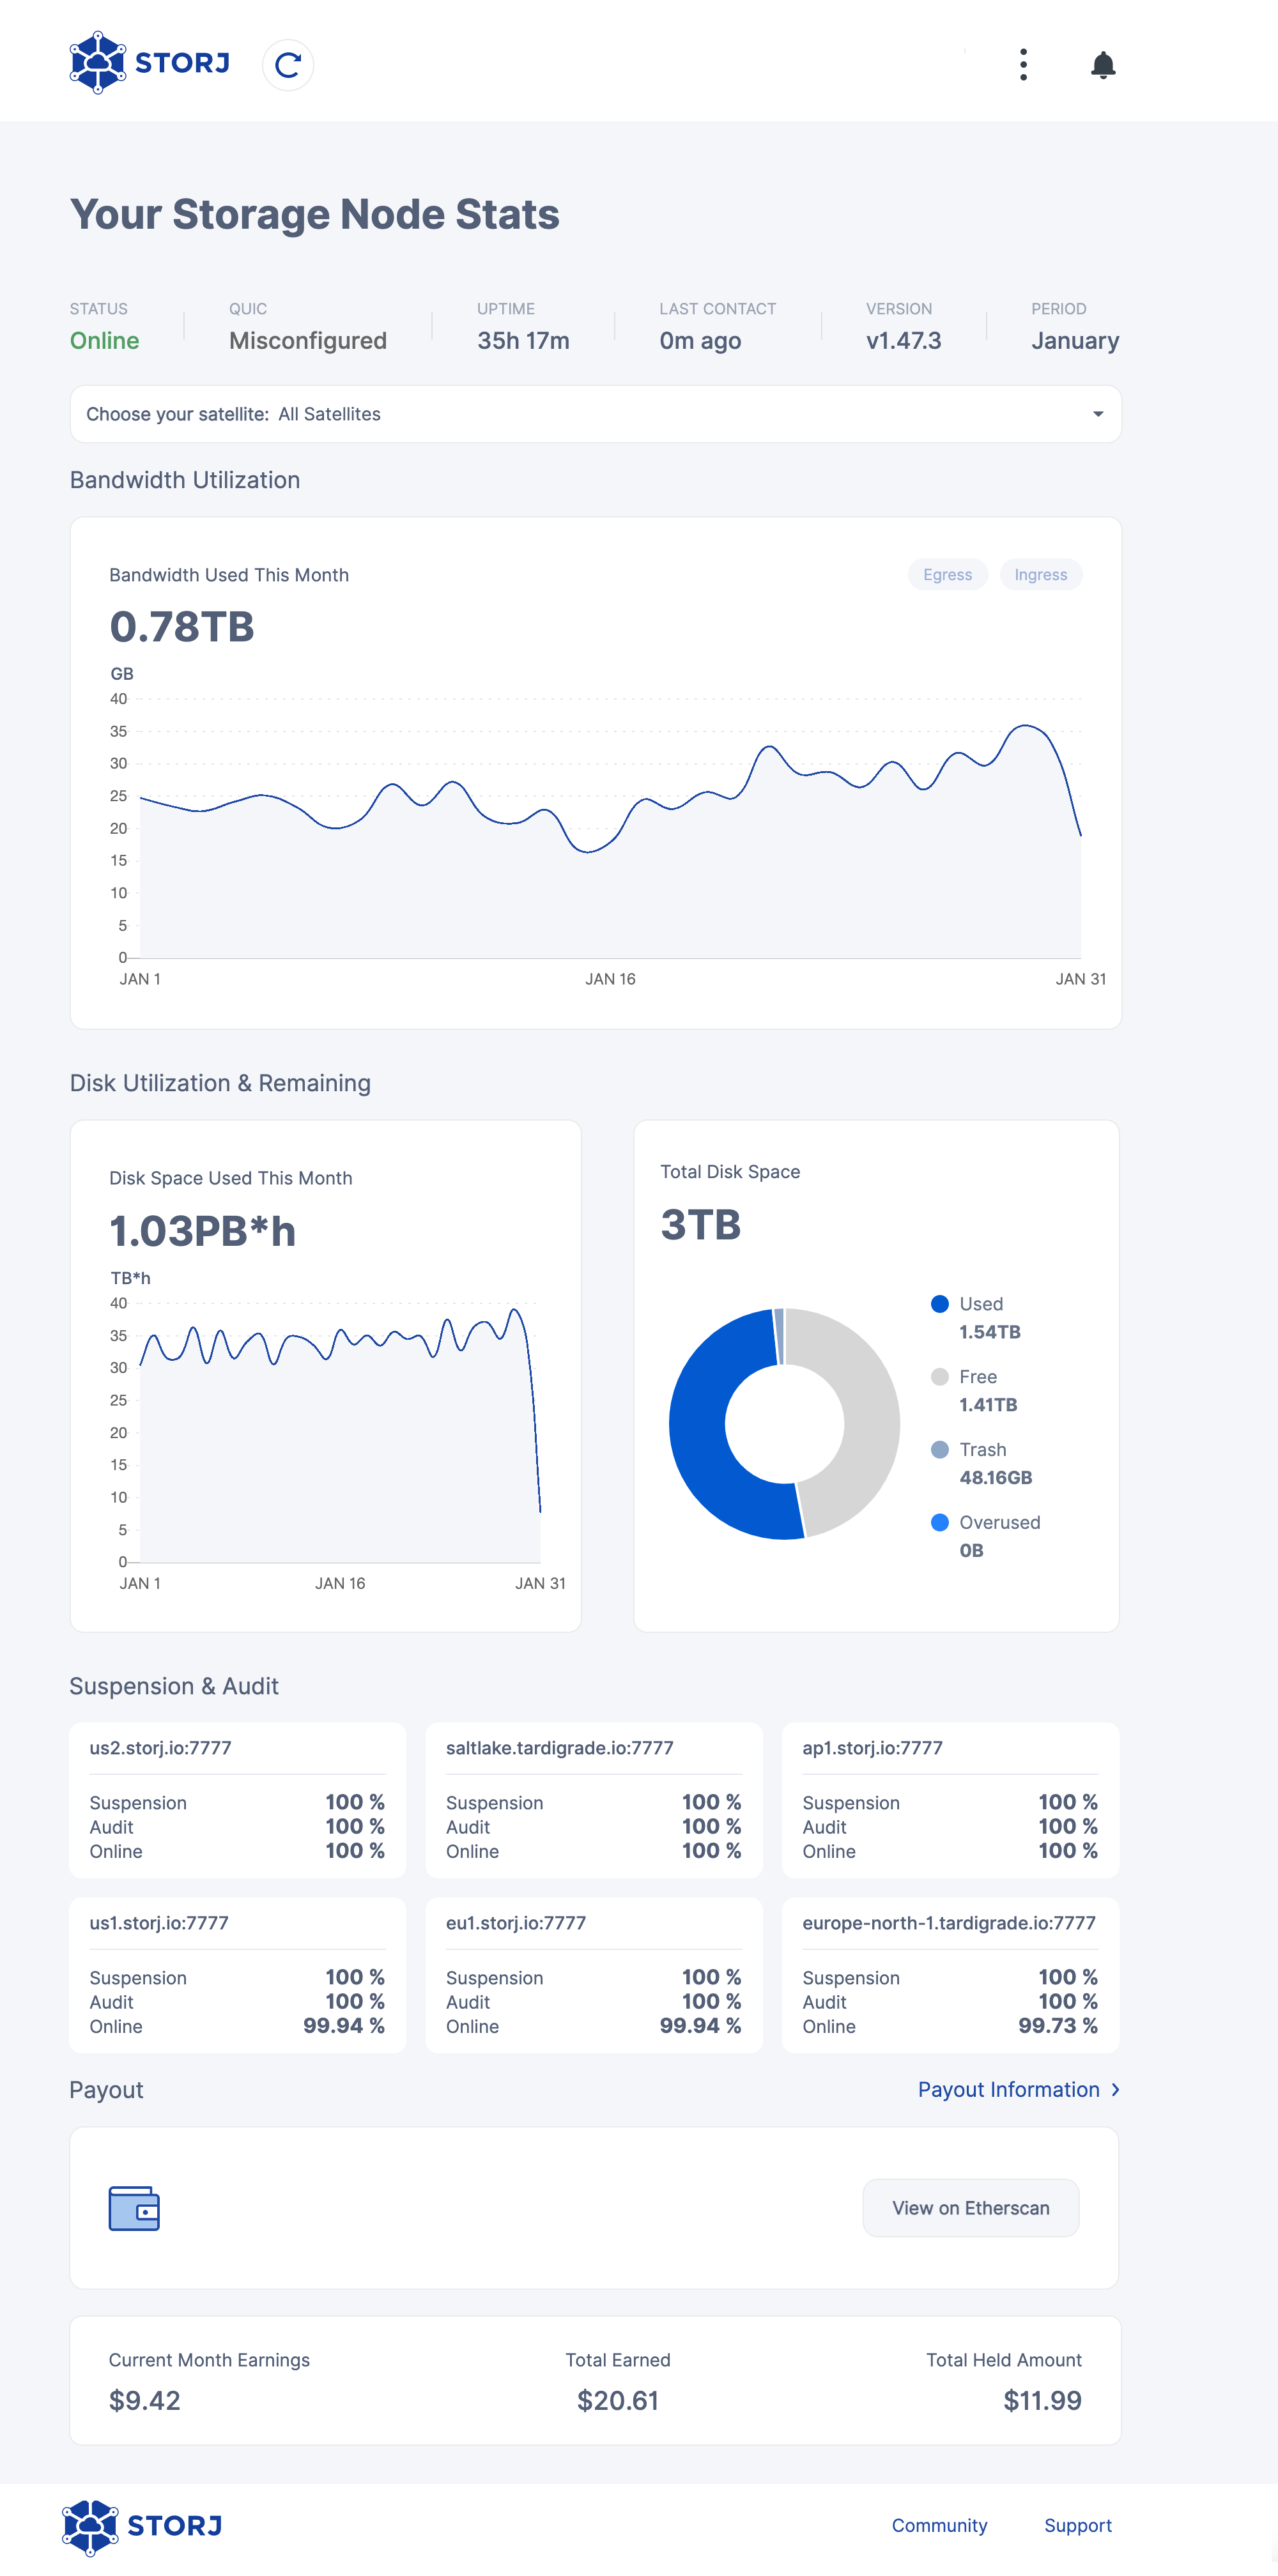 Storj Dashboard end of January 2022. Bandwidth used: 0.78 TB. Hours of storage used: 1.03 PB*h. Total available storage: 3 TB. Used storage: 1.54 TB. Free disk space: 1.41 TB. Recycle bin: 48.16 GB. Earnings this month: $9.42. Total earnings: $20.61. Withheld earnings: $11.99.